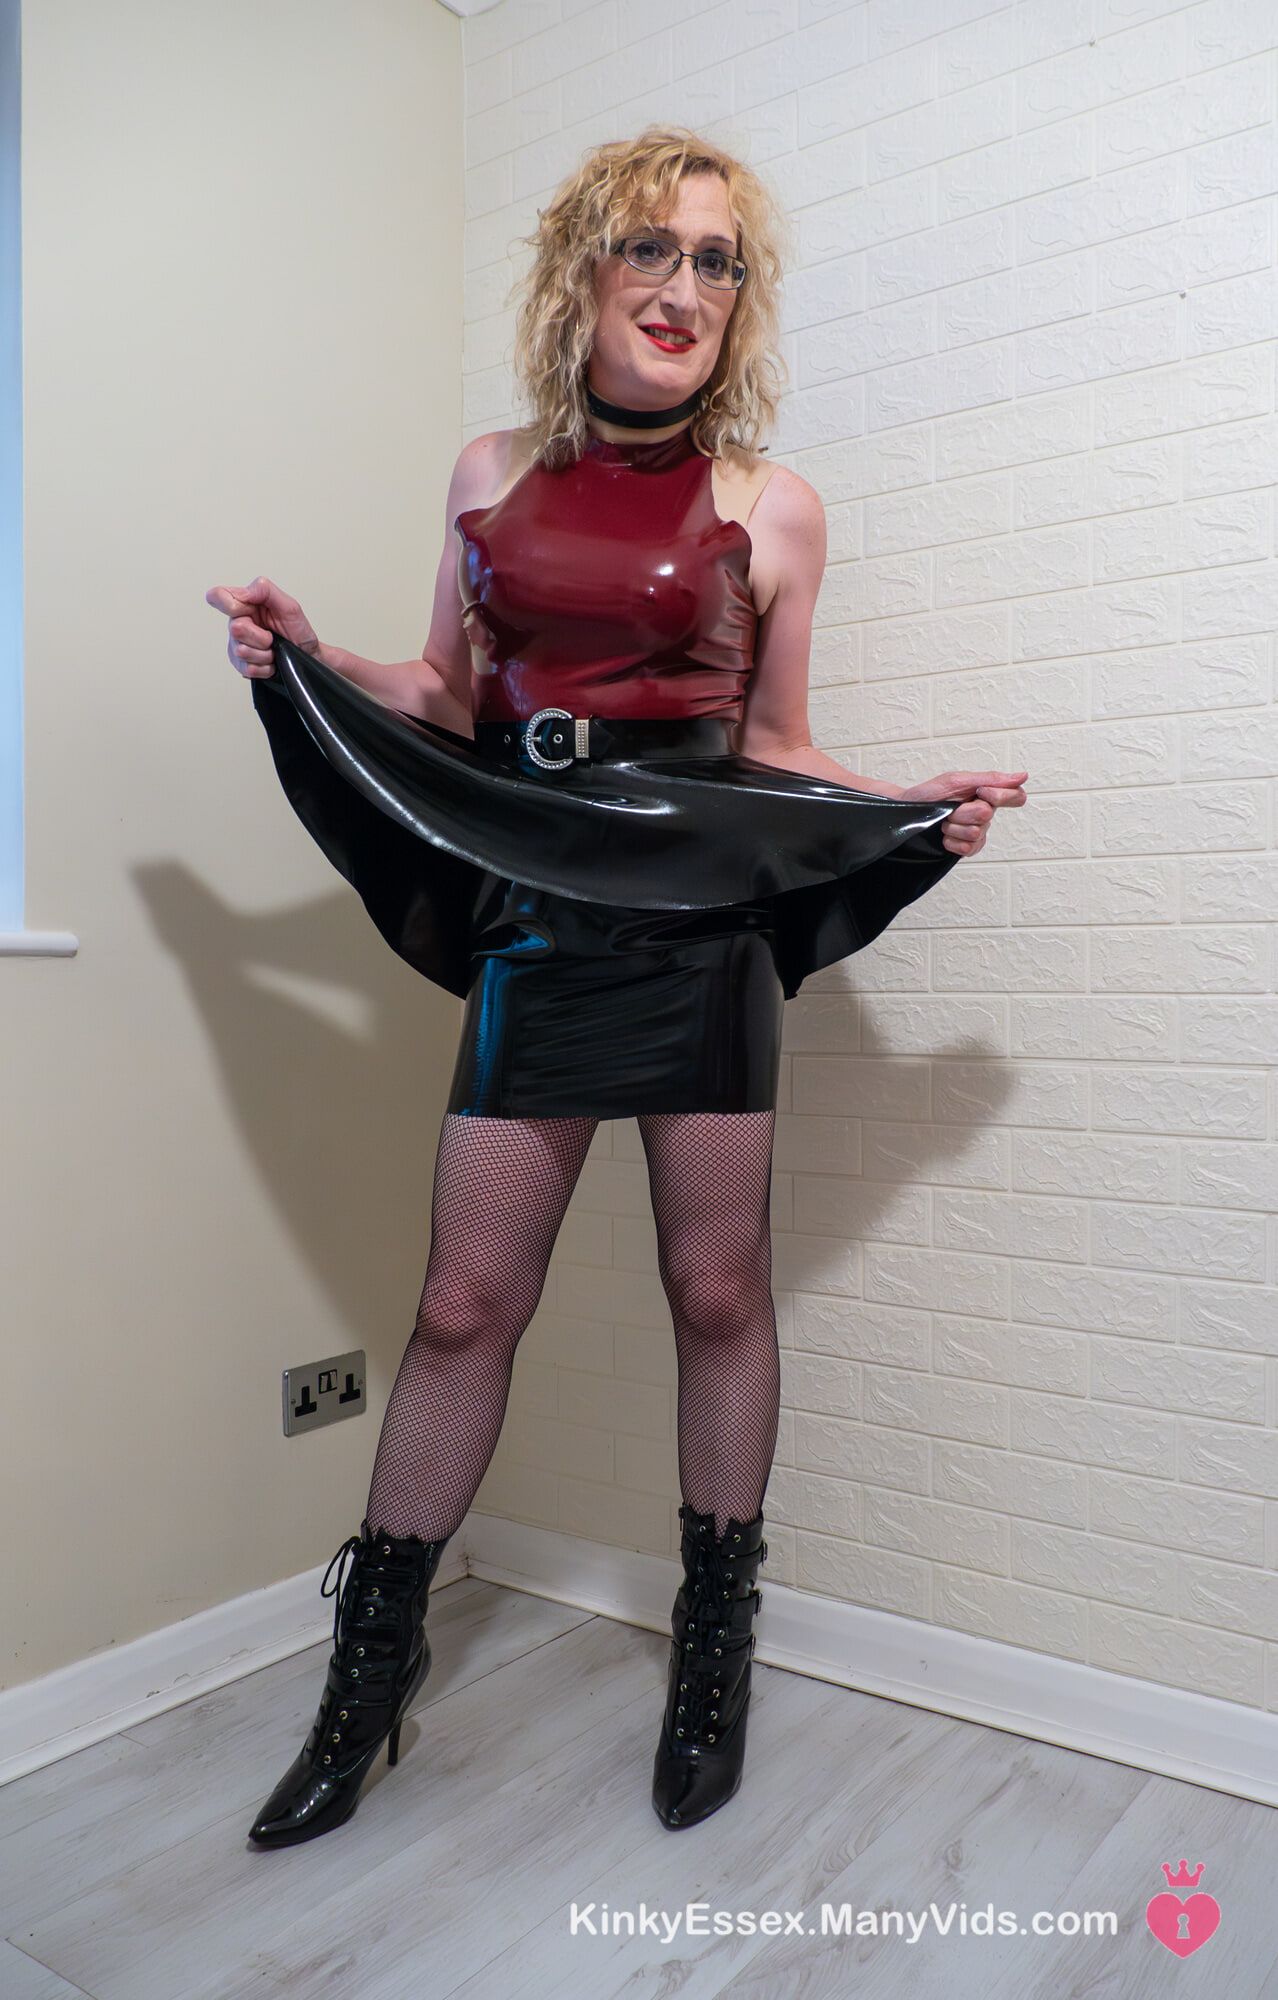 Colour Latex Dress, Boots and Fishnets on British Milf #12